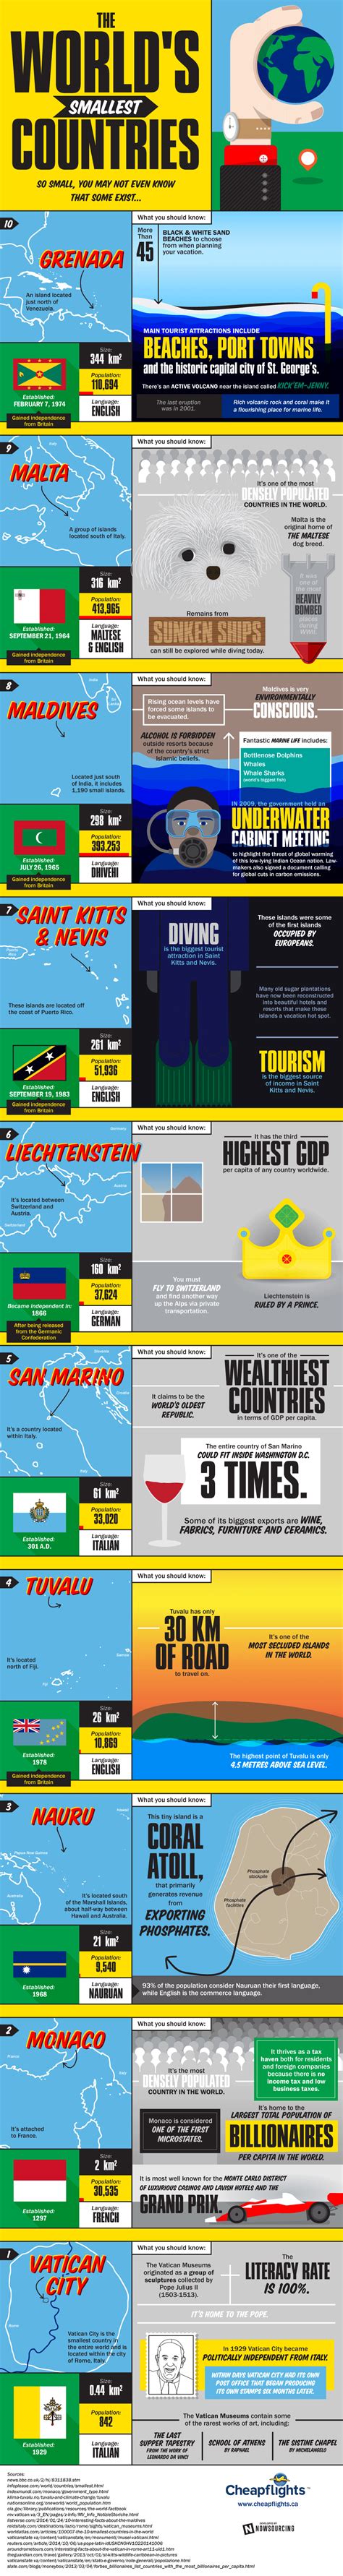 The Worlds Smallest Countries Infographic